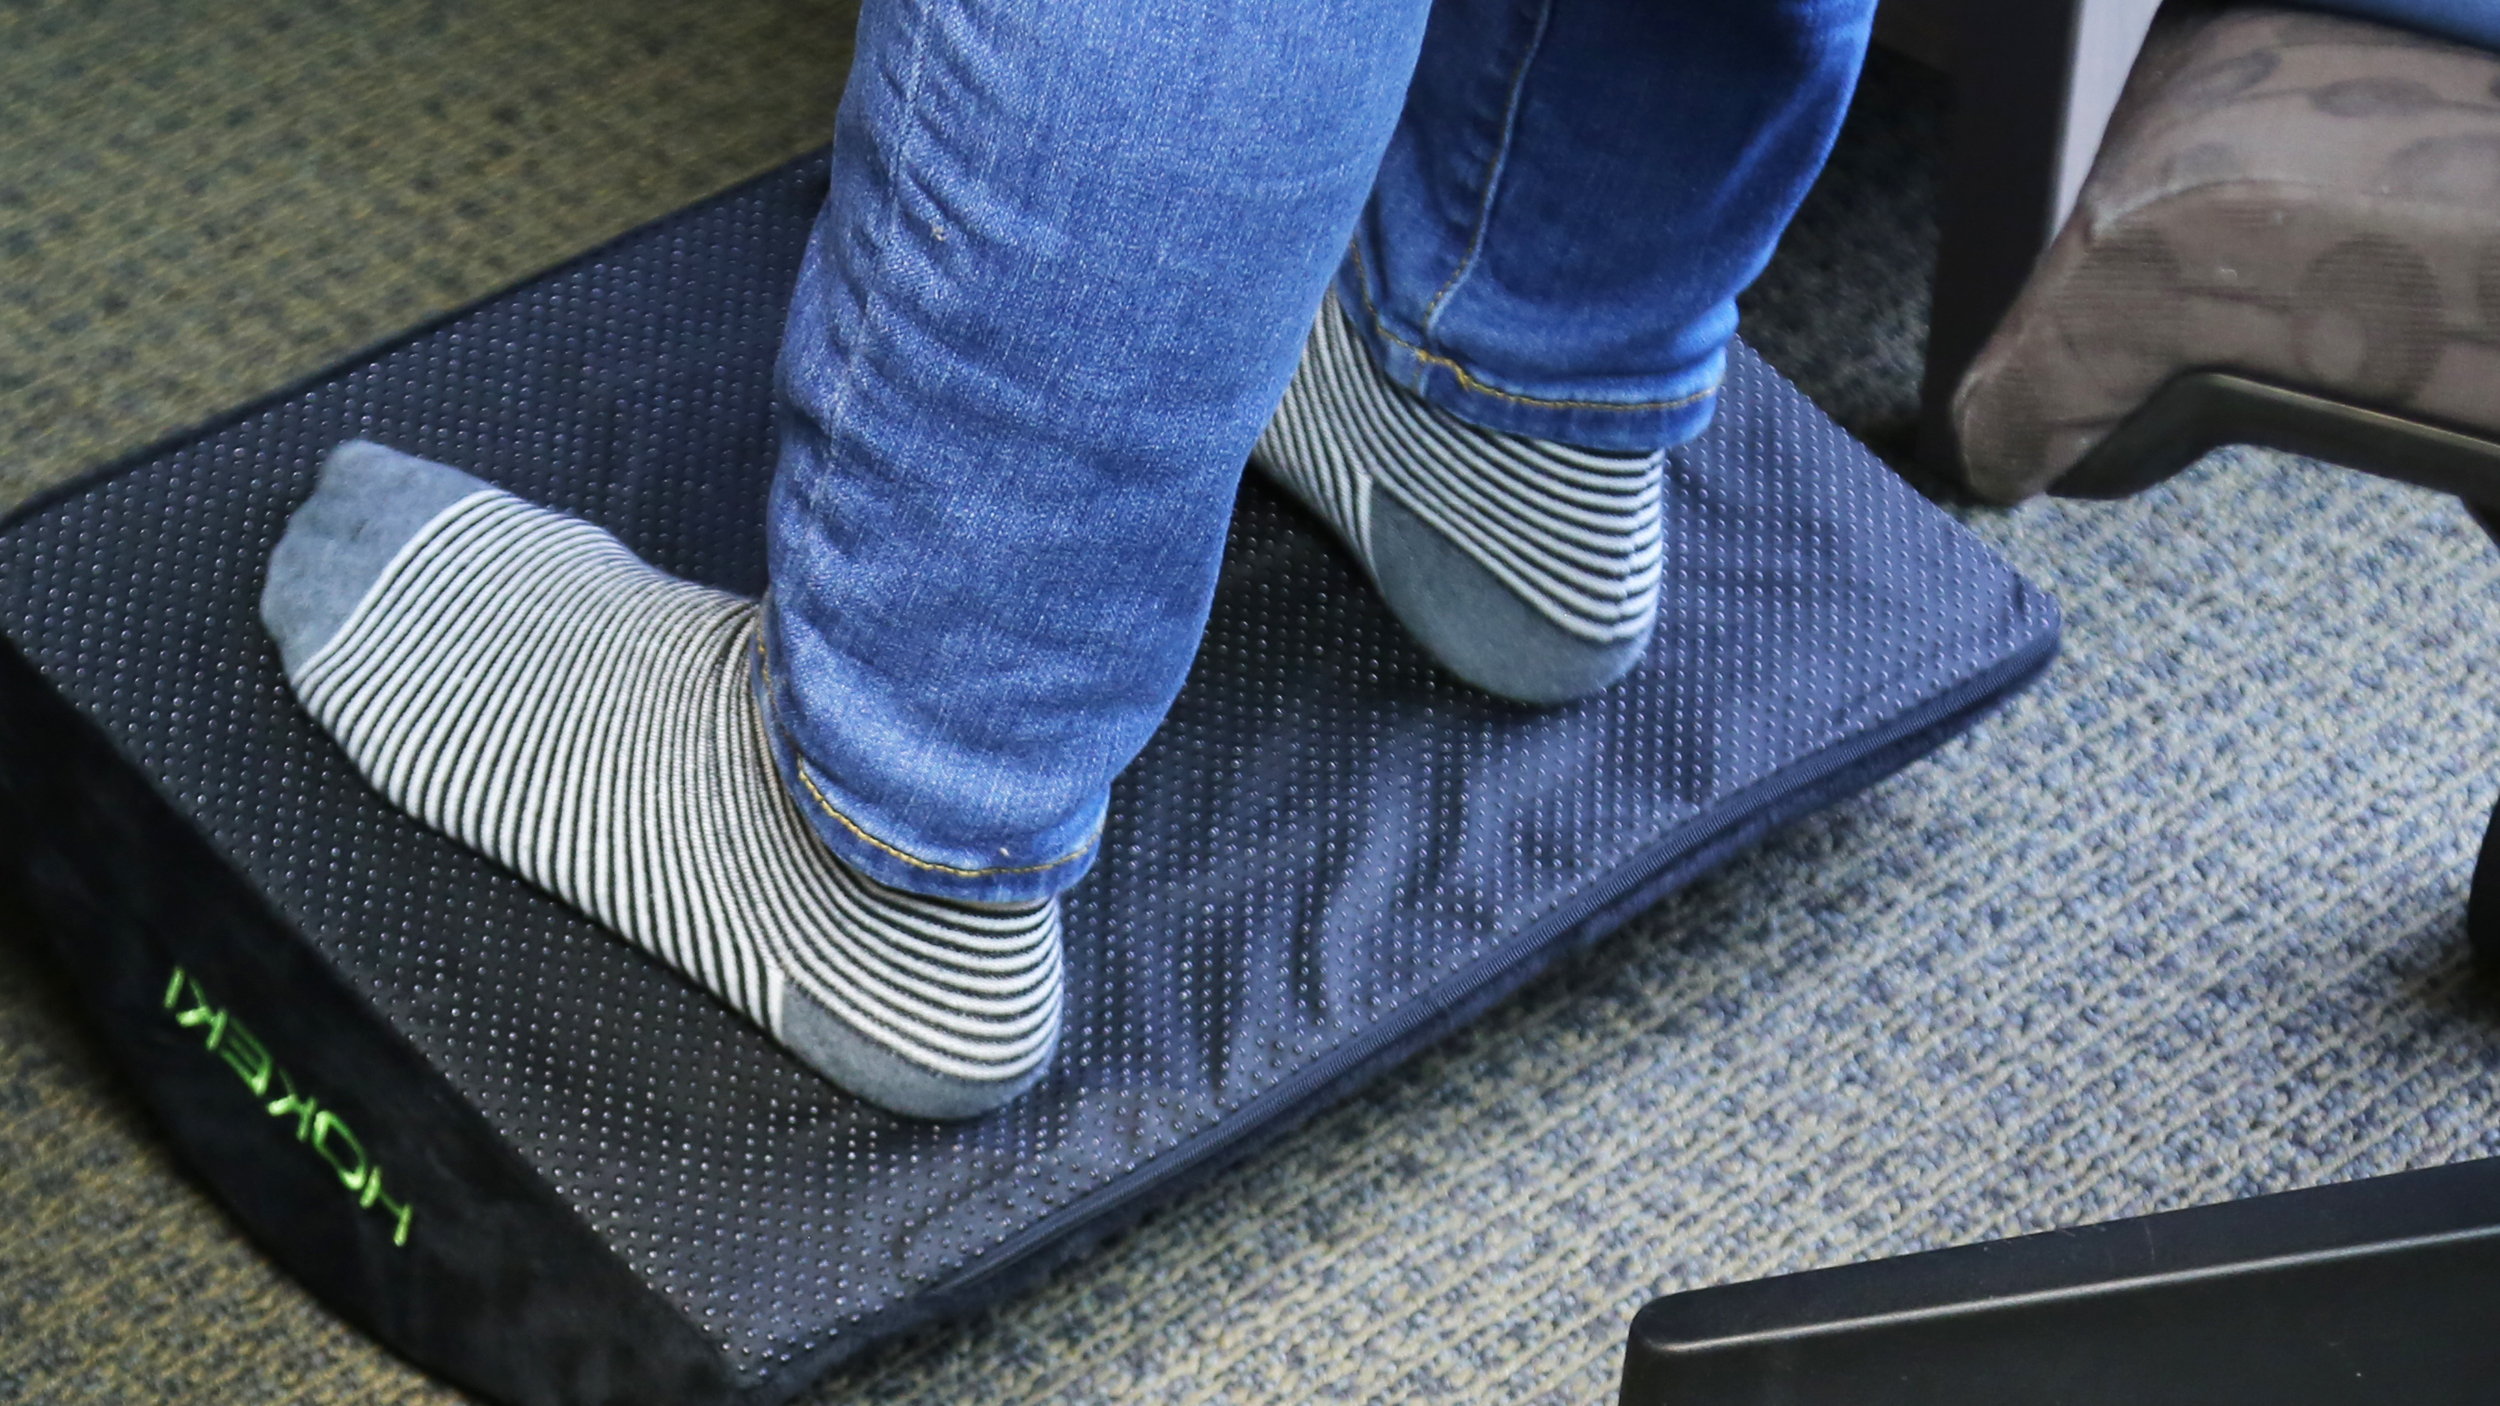 Comfilife Foot Rest: Memory Foam Foot Rest For WFH Office – SheKnows